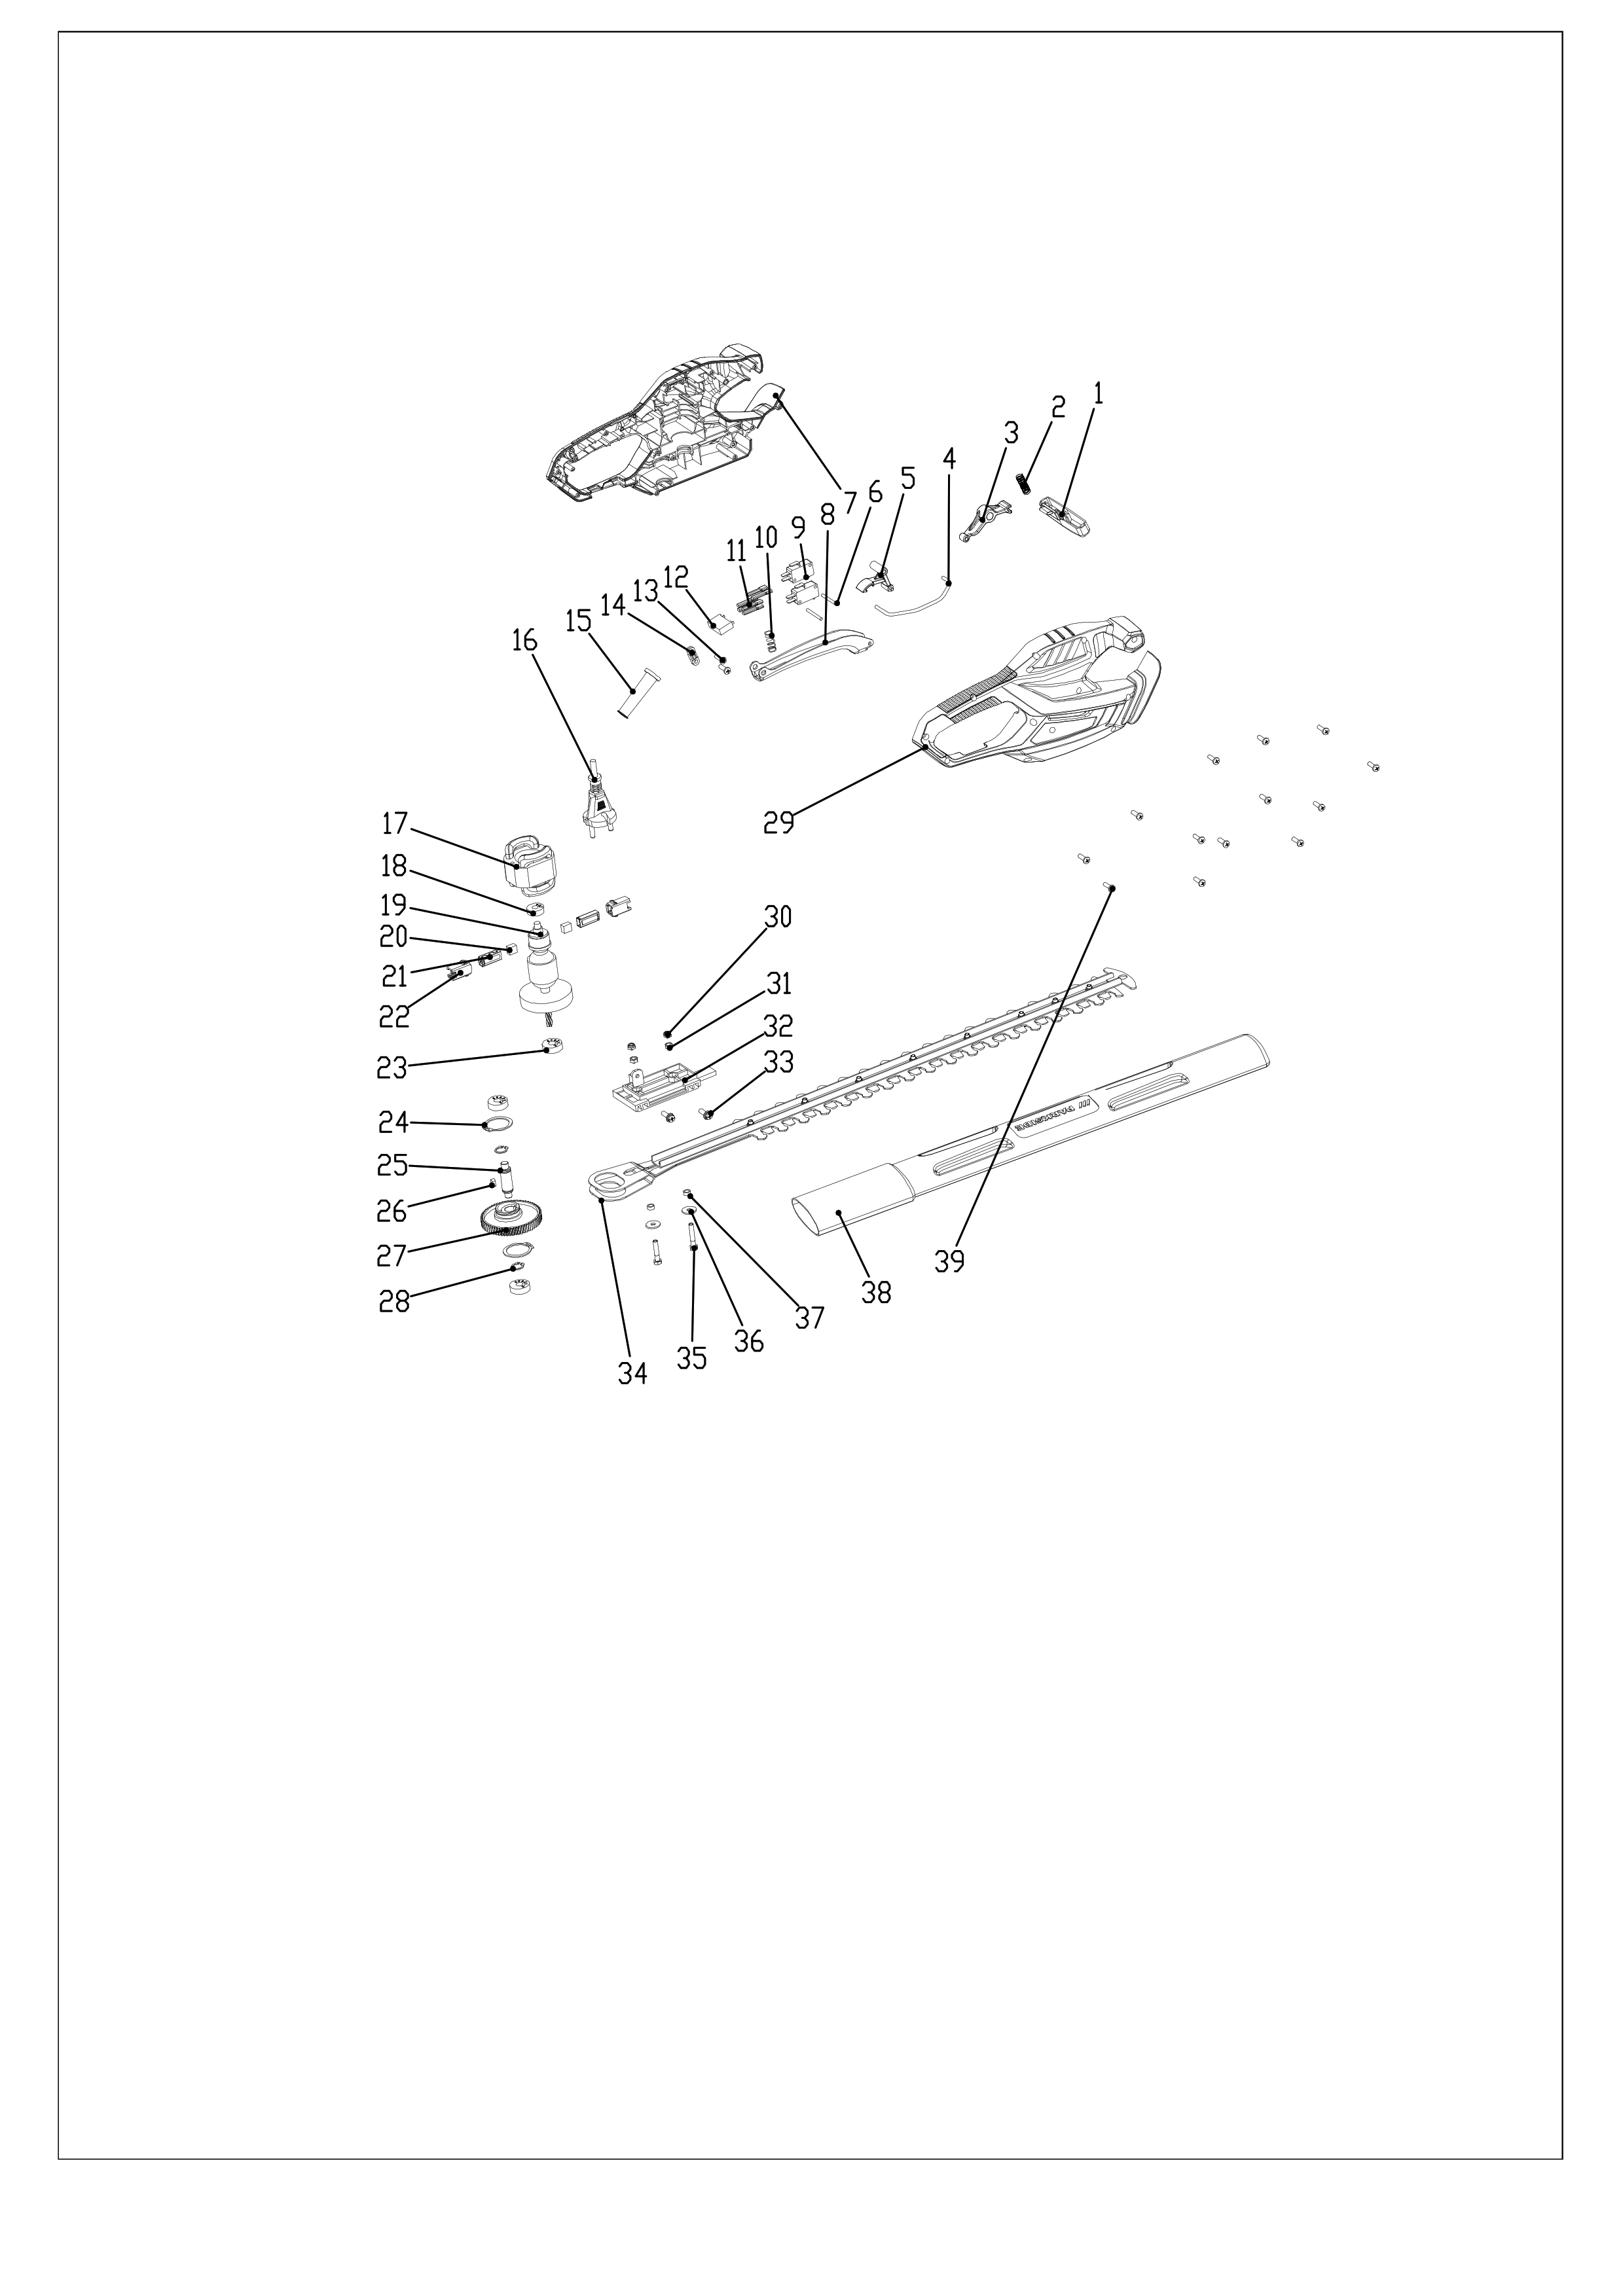 https://kingfisherspares.com/assets/images/products/drawings/NMHT450_EPD_WEB_DRG1.png